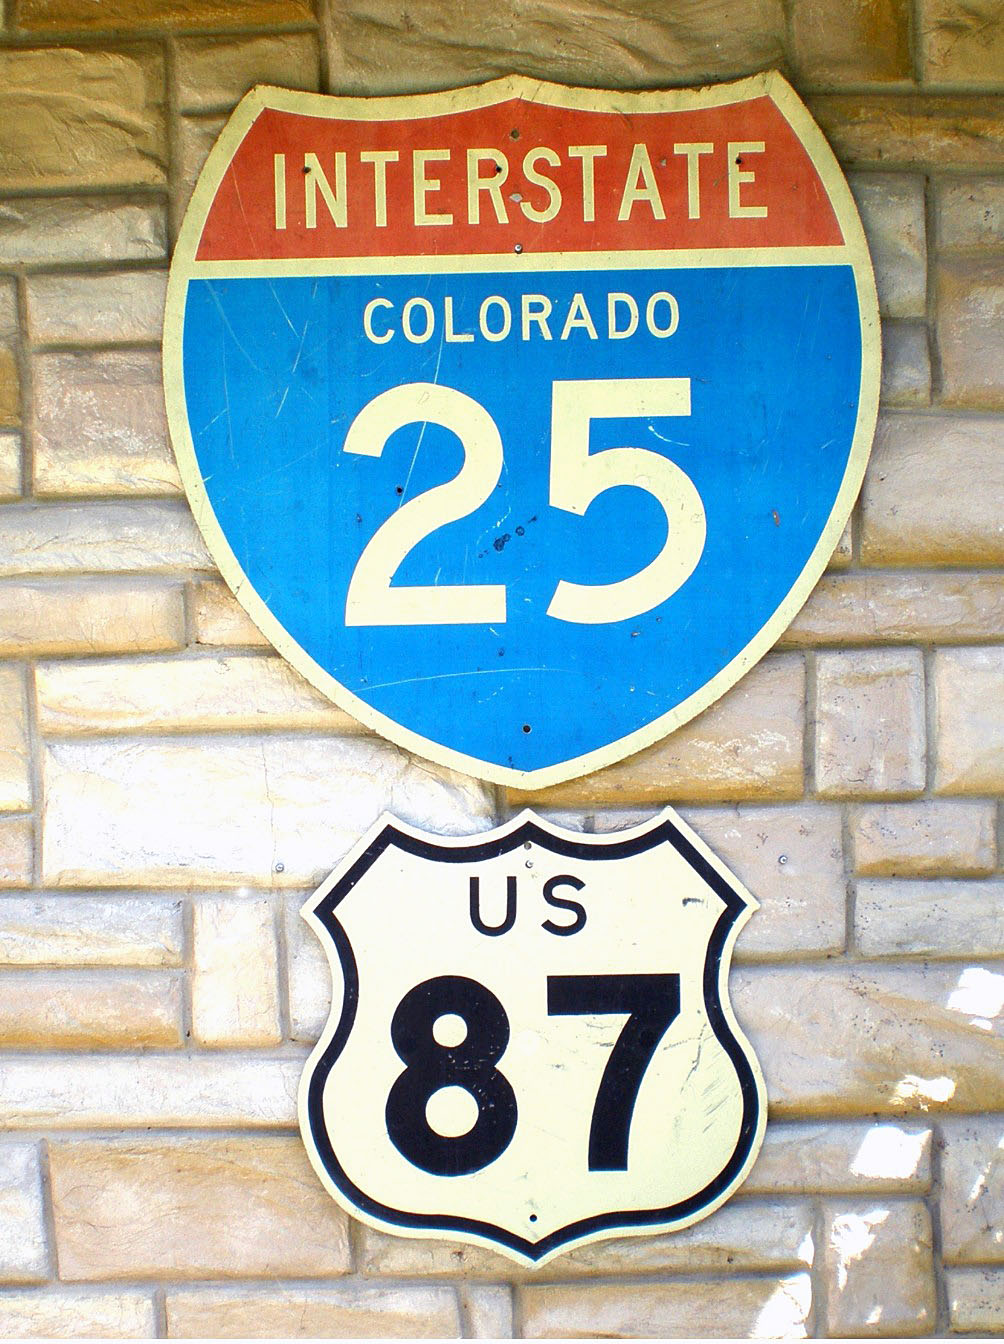 Colorado - Interstate 25 and U.S. Highway 87 sign.